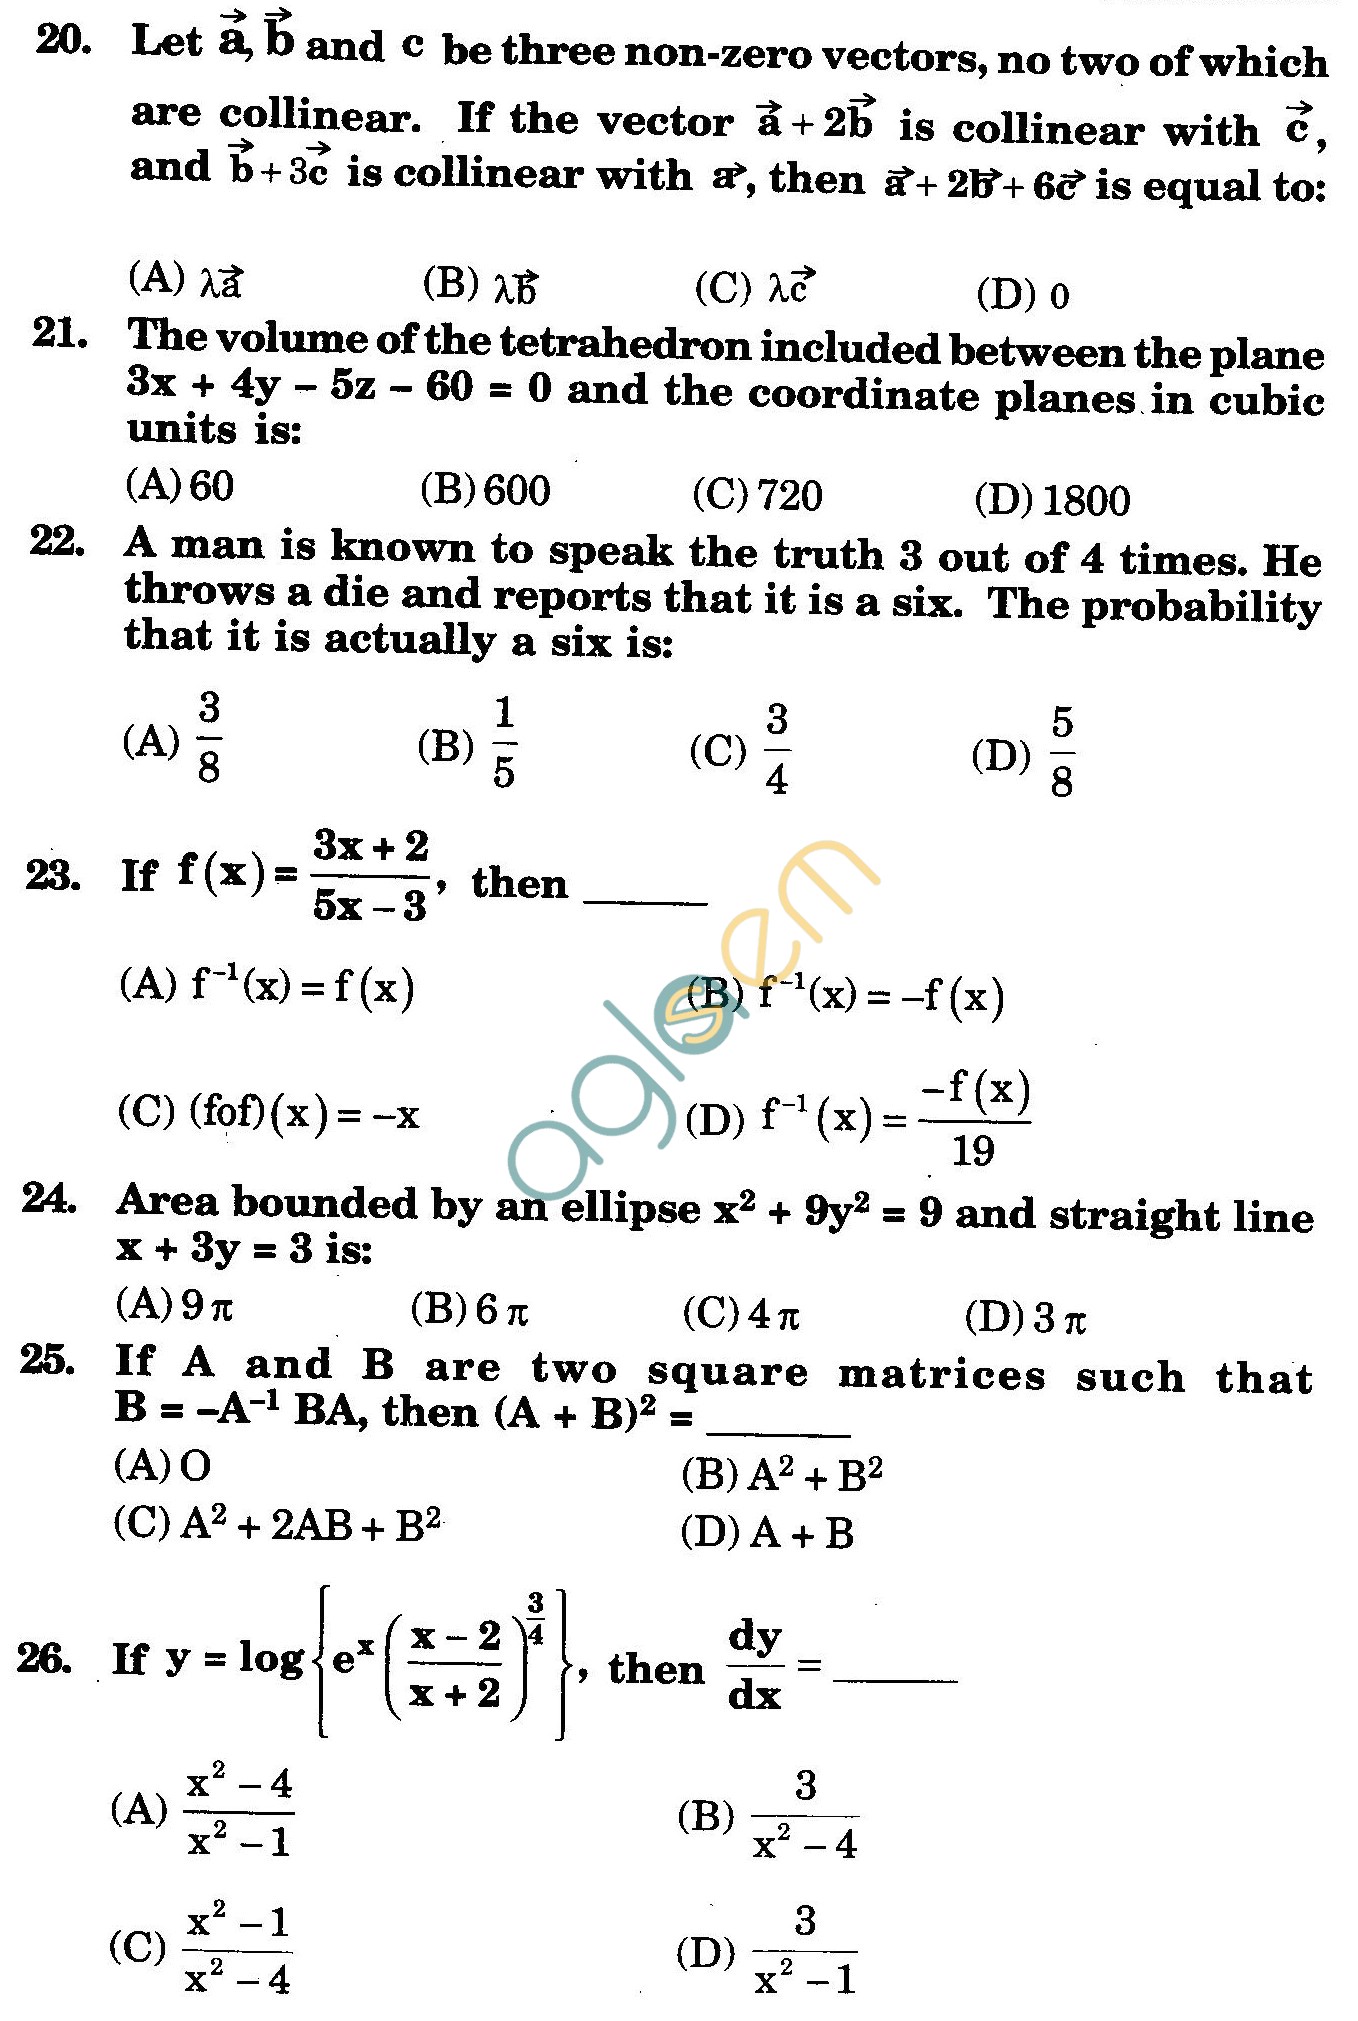 NSTSE 2009 Class XII PCM Question Paper with Answers - Mathematics